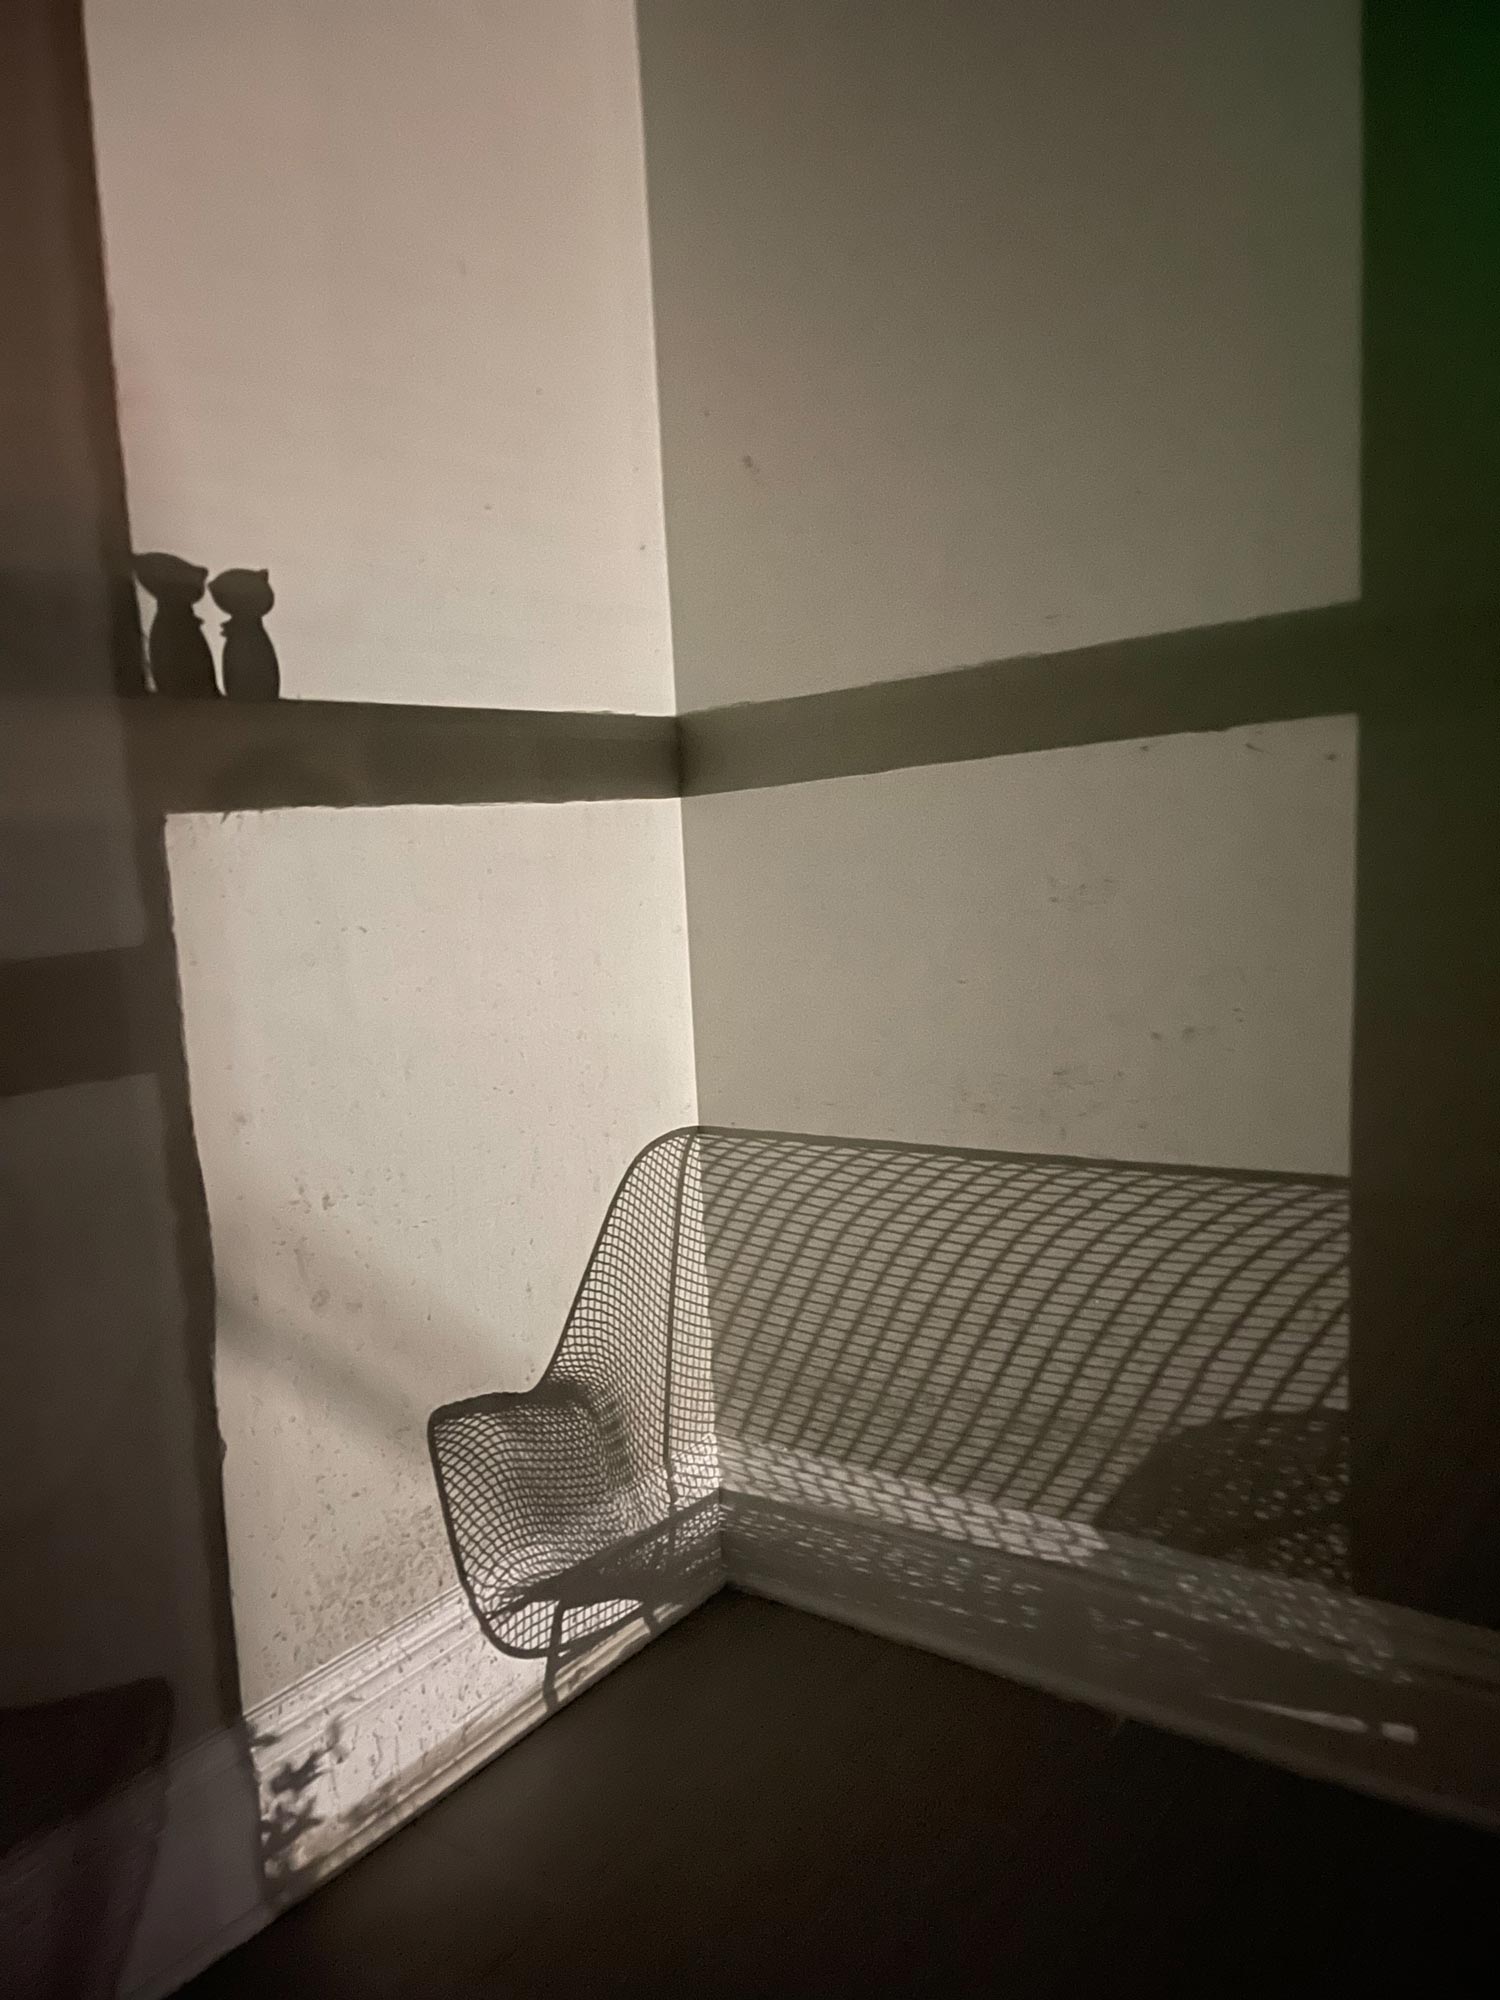 Shadow of chair and ornaments on corner of room wall